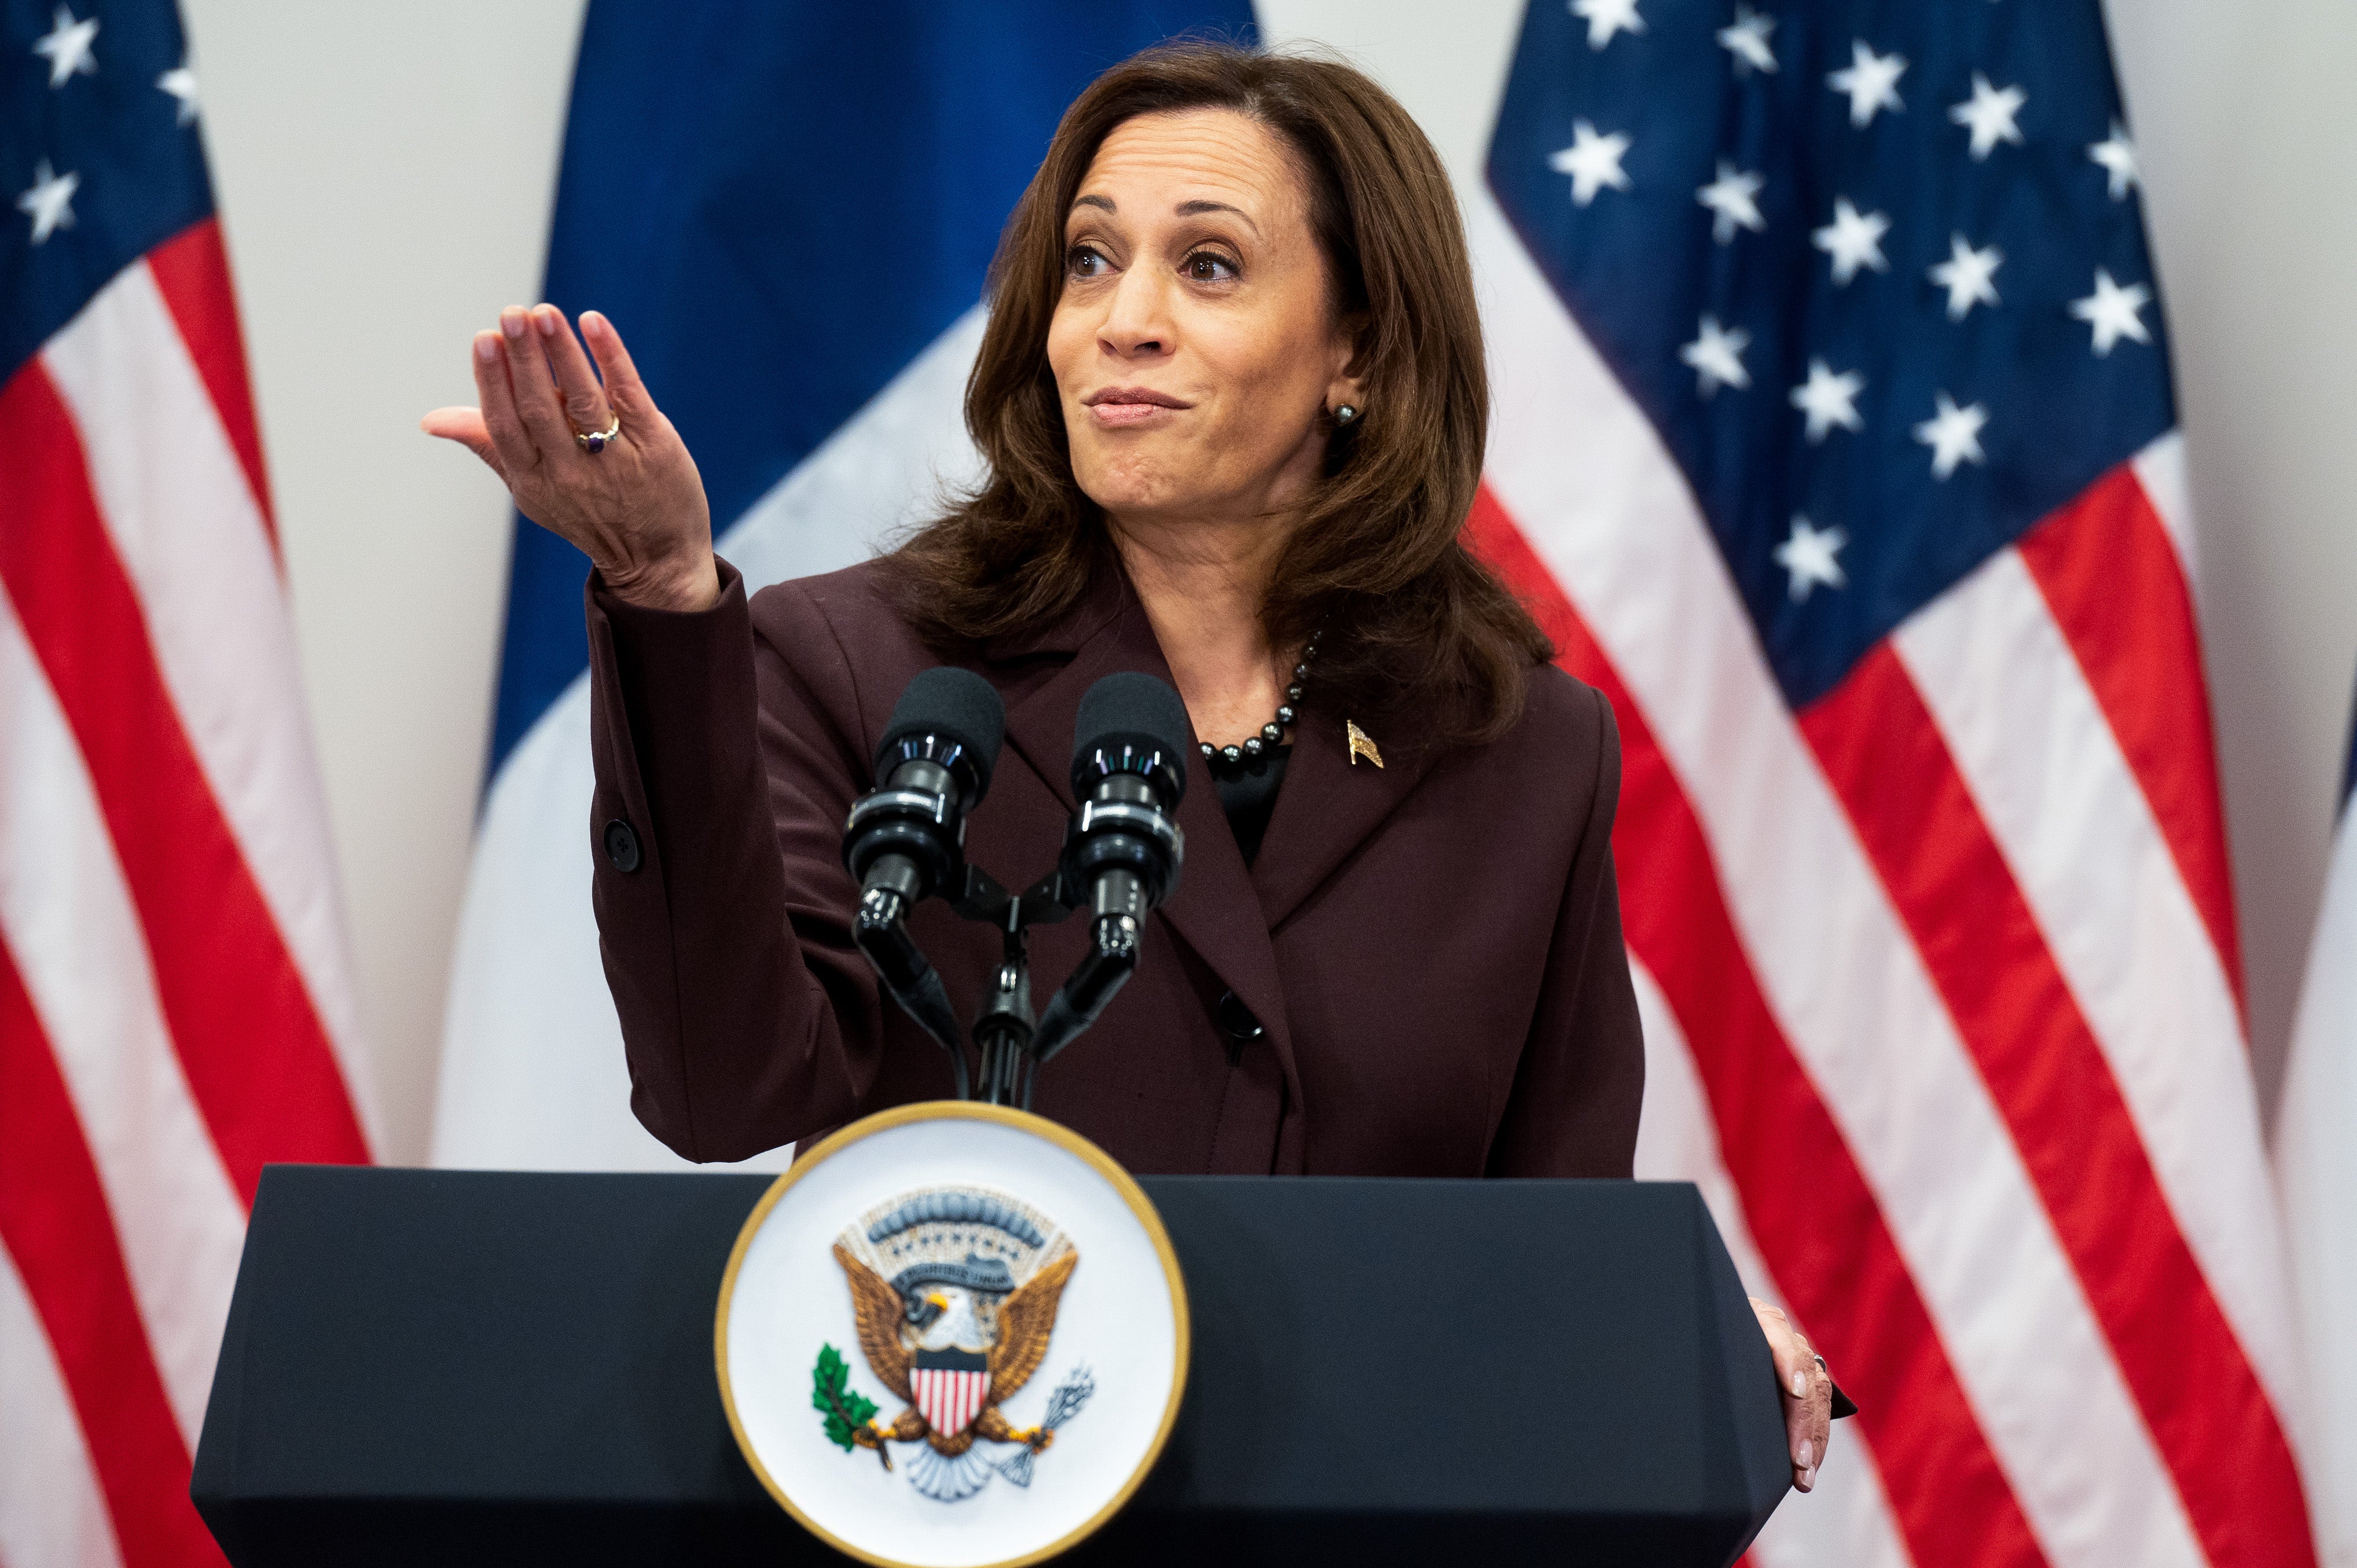 Kamala Harris asked how France trip would 'prepare' her for the presidency